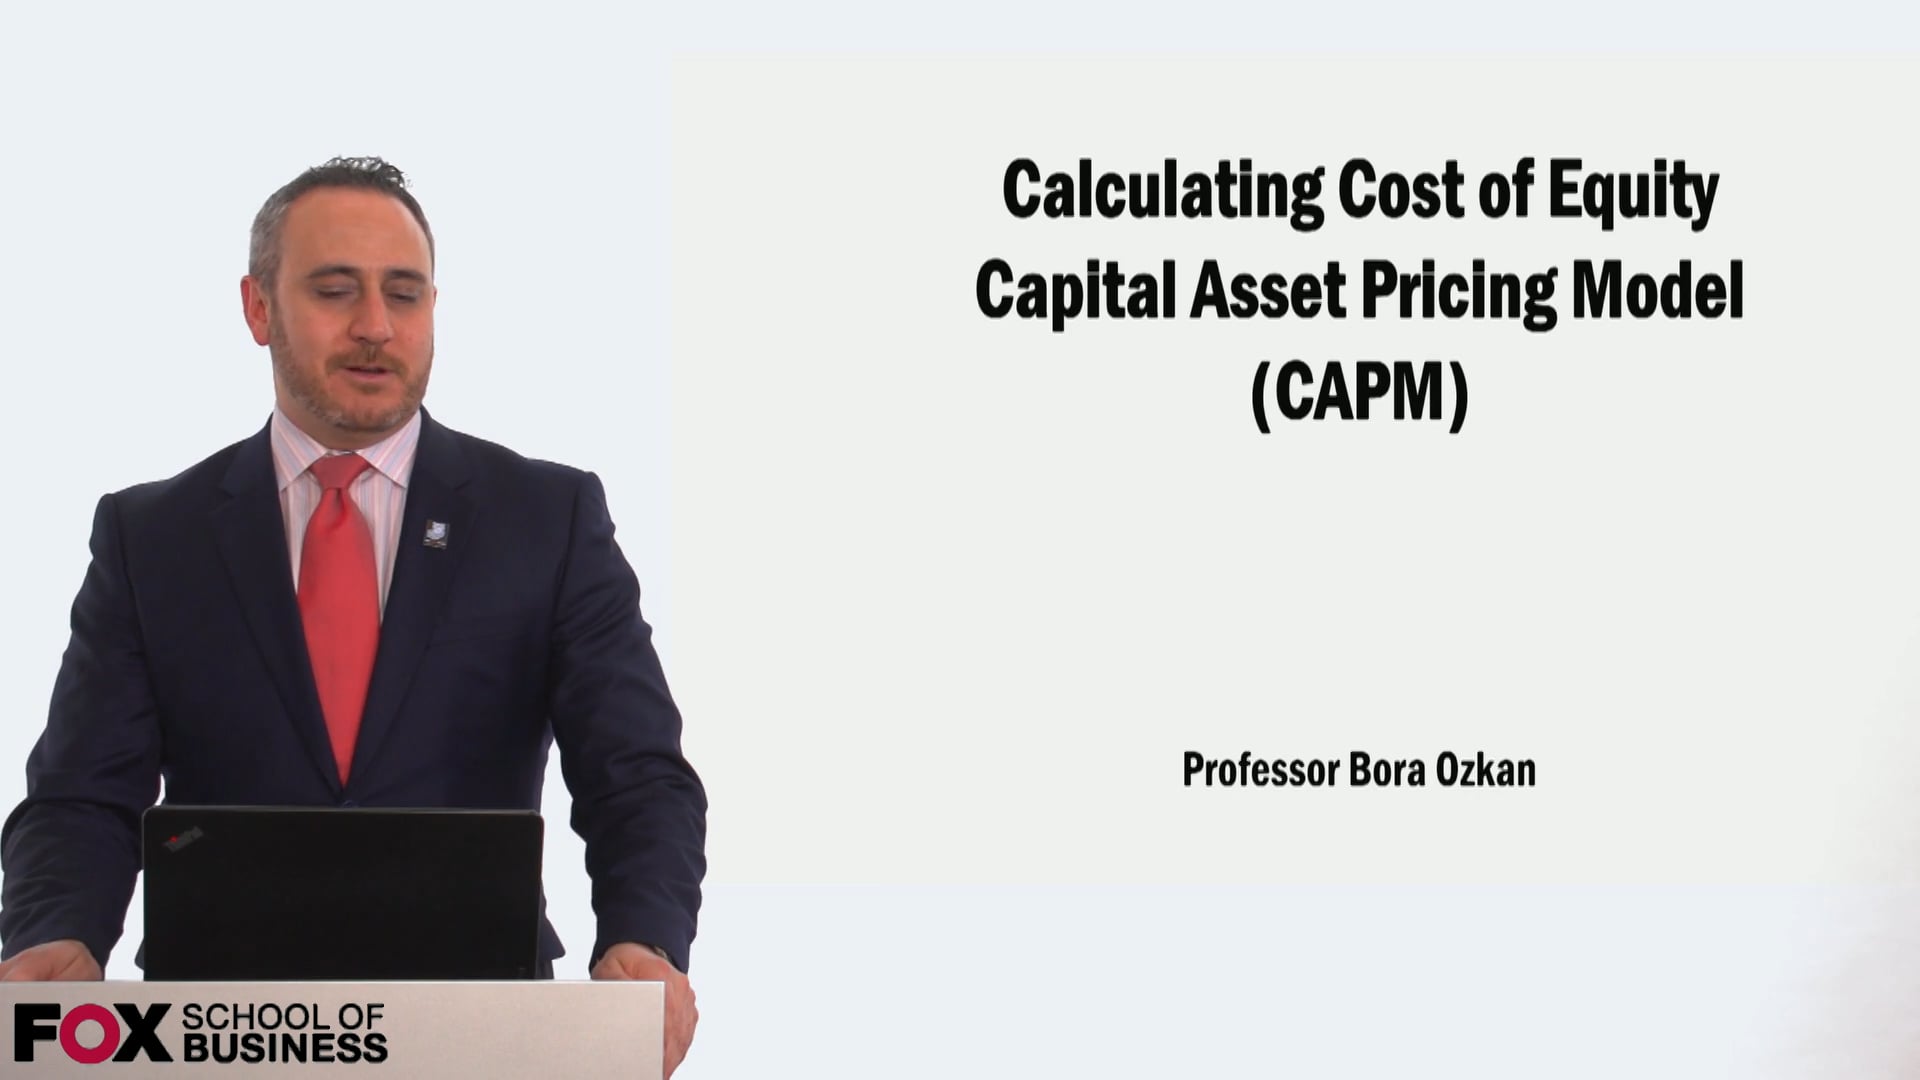 Calculating the Cost of Equity using Capital Asset Pricing Model